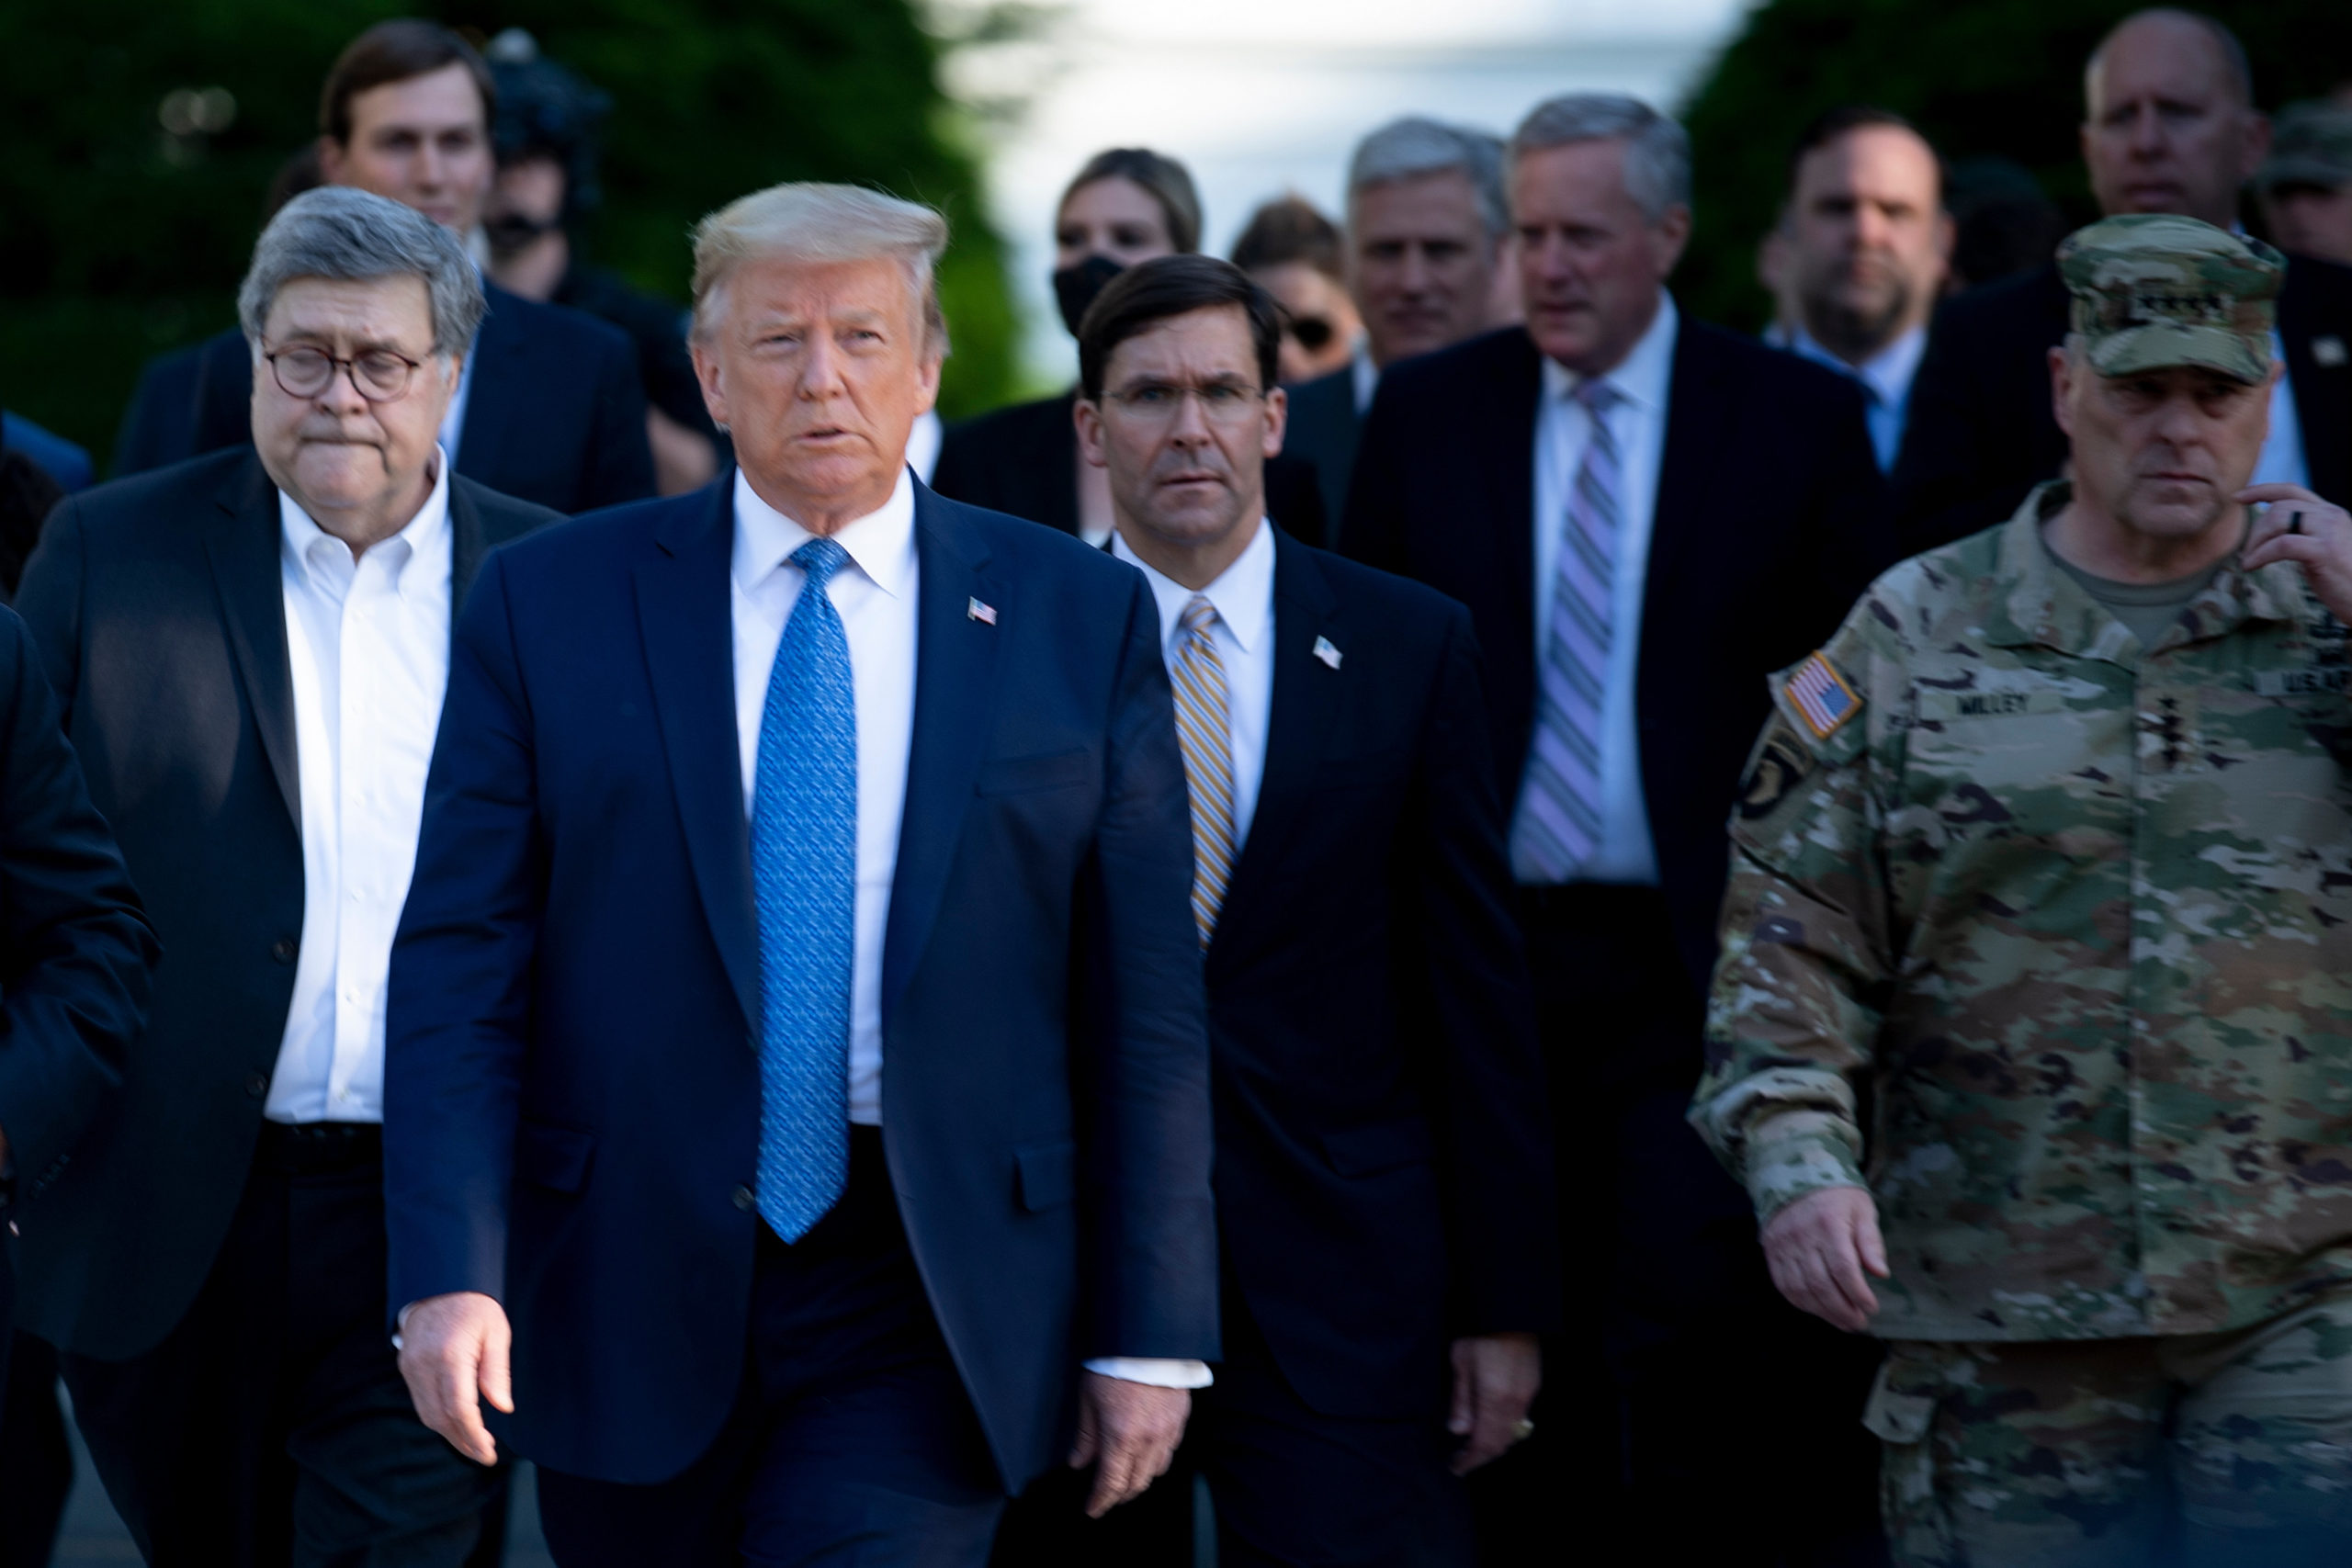 US President Donald Trump walks with US Attorney General William Barr (L), US Secretary of Defence Mark T. Esper (C), Chairman of the Joint Chiefs of Staff Mark A. Milley (R), and others from the White House to visit St. John's Church after the area was cleared of people protesting the death of George Floyd June 1, 2020, in Washington, DC (Photo: Getty Images)